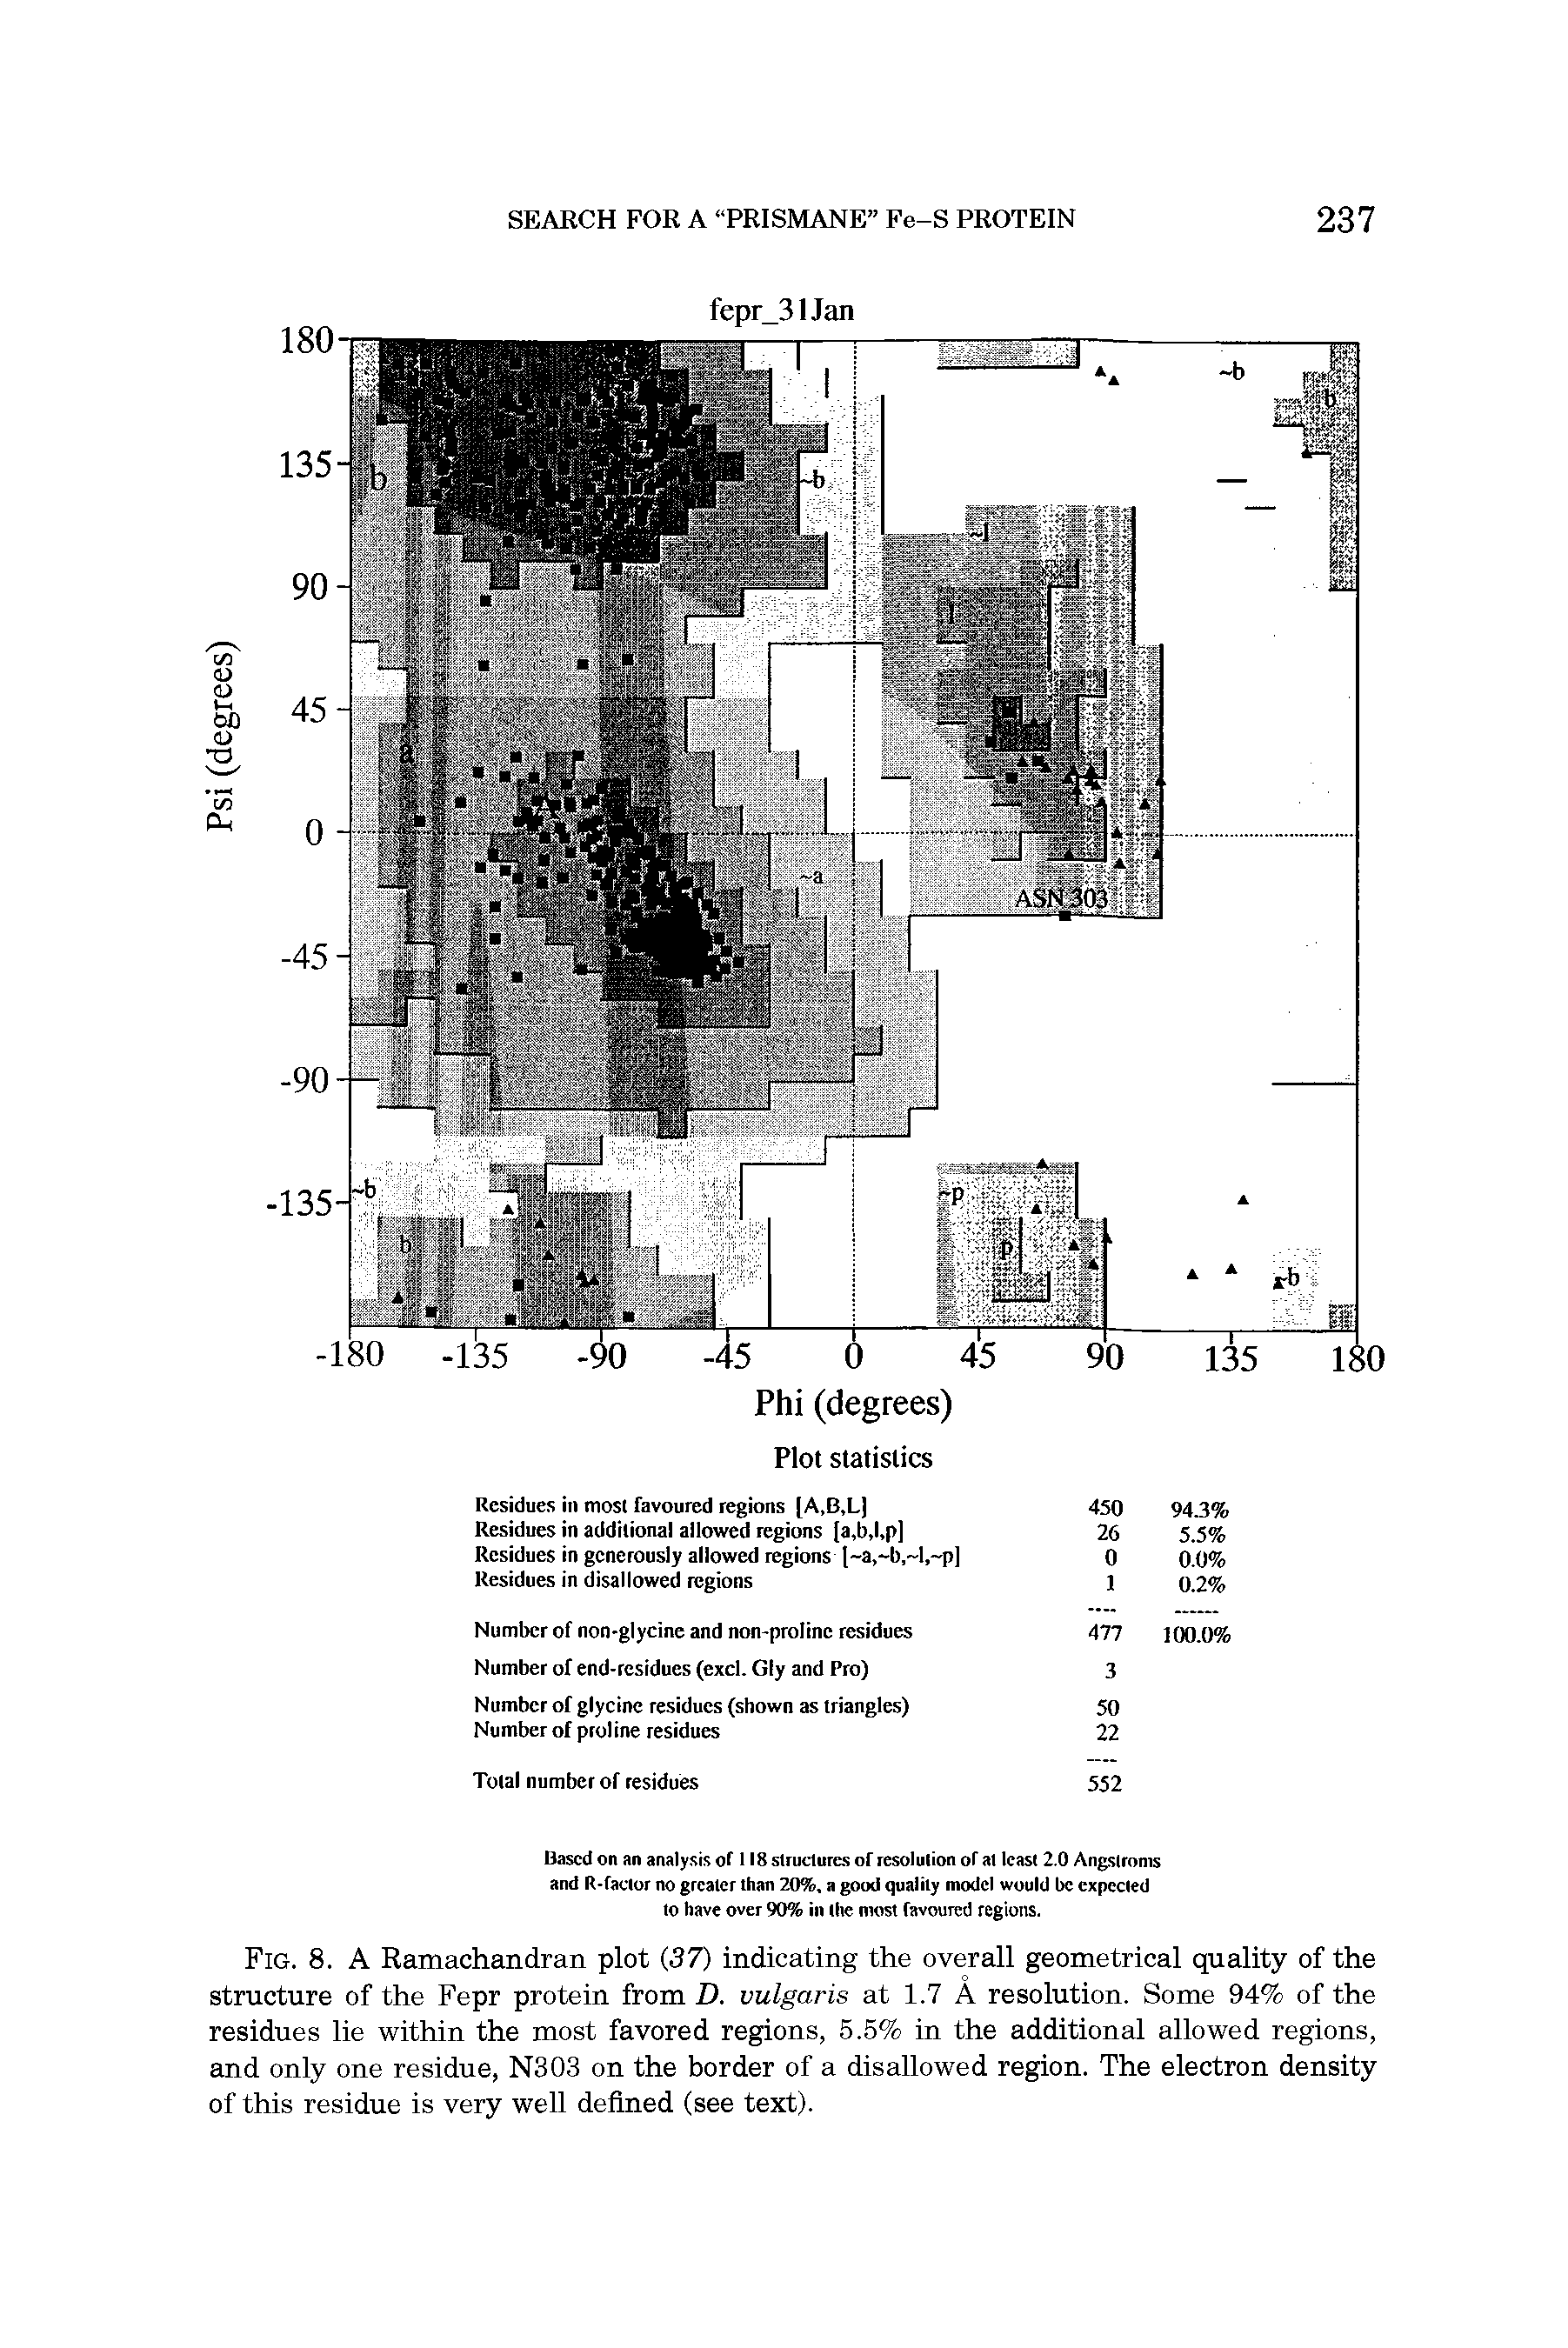 Fig. 8. A Ramachandran plot (37) indicating the overall geometrical quality of the structure of the Fepr protein from D. vulgaris at 1.7 A resolution. Some 94% of the residues lie within the most favored regions, 5.5% in the additional allowed regions, and only one residue, N303 on the border of a disallowed region. The electron density of this residue is very well defined (see text).